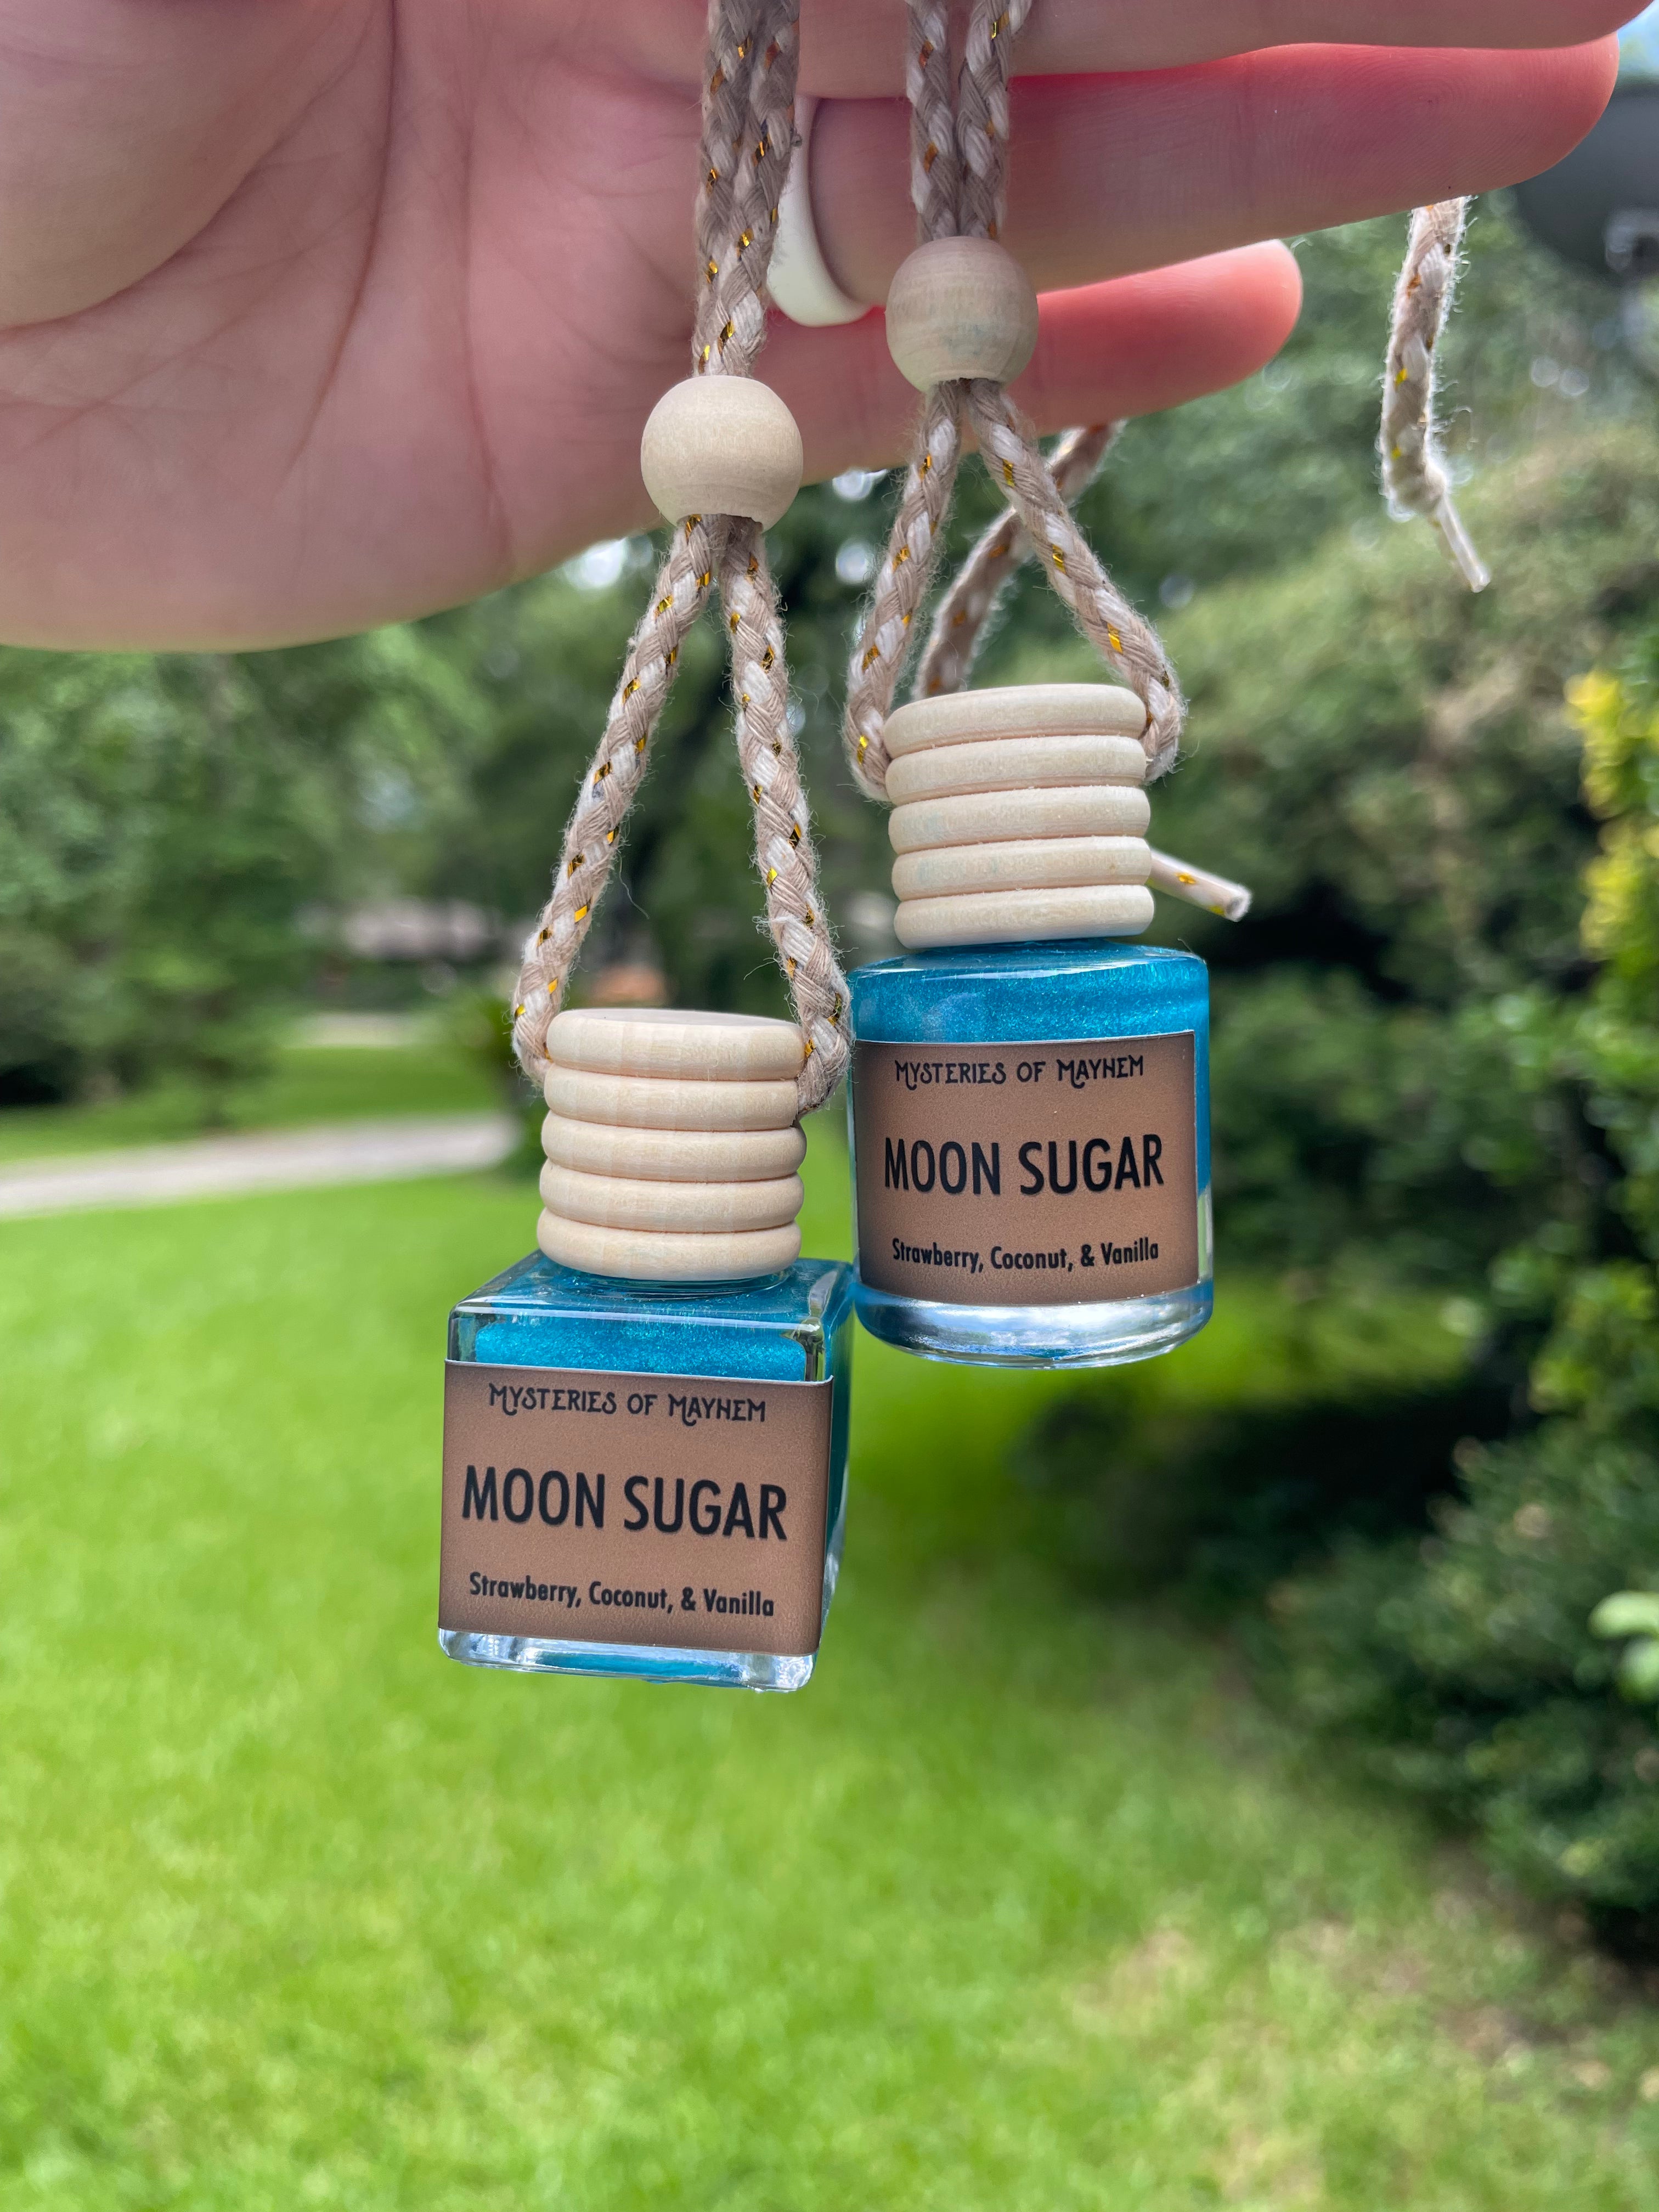 Moon Sugar Portable Scent Diffuser - Strawberry, Coconut, and Vanilla Scented Car Diffuser - Gift for Gamers - Gamer Gift